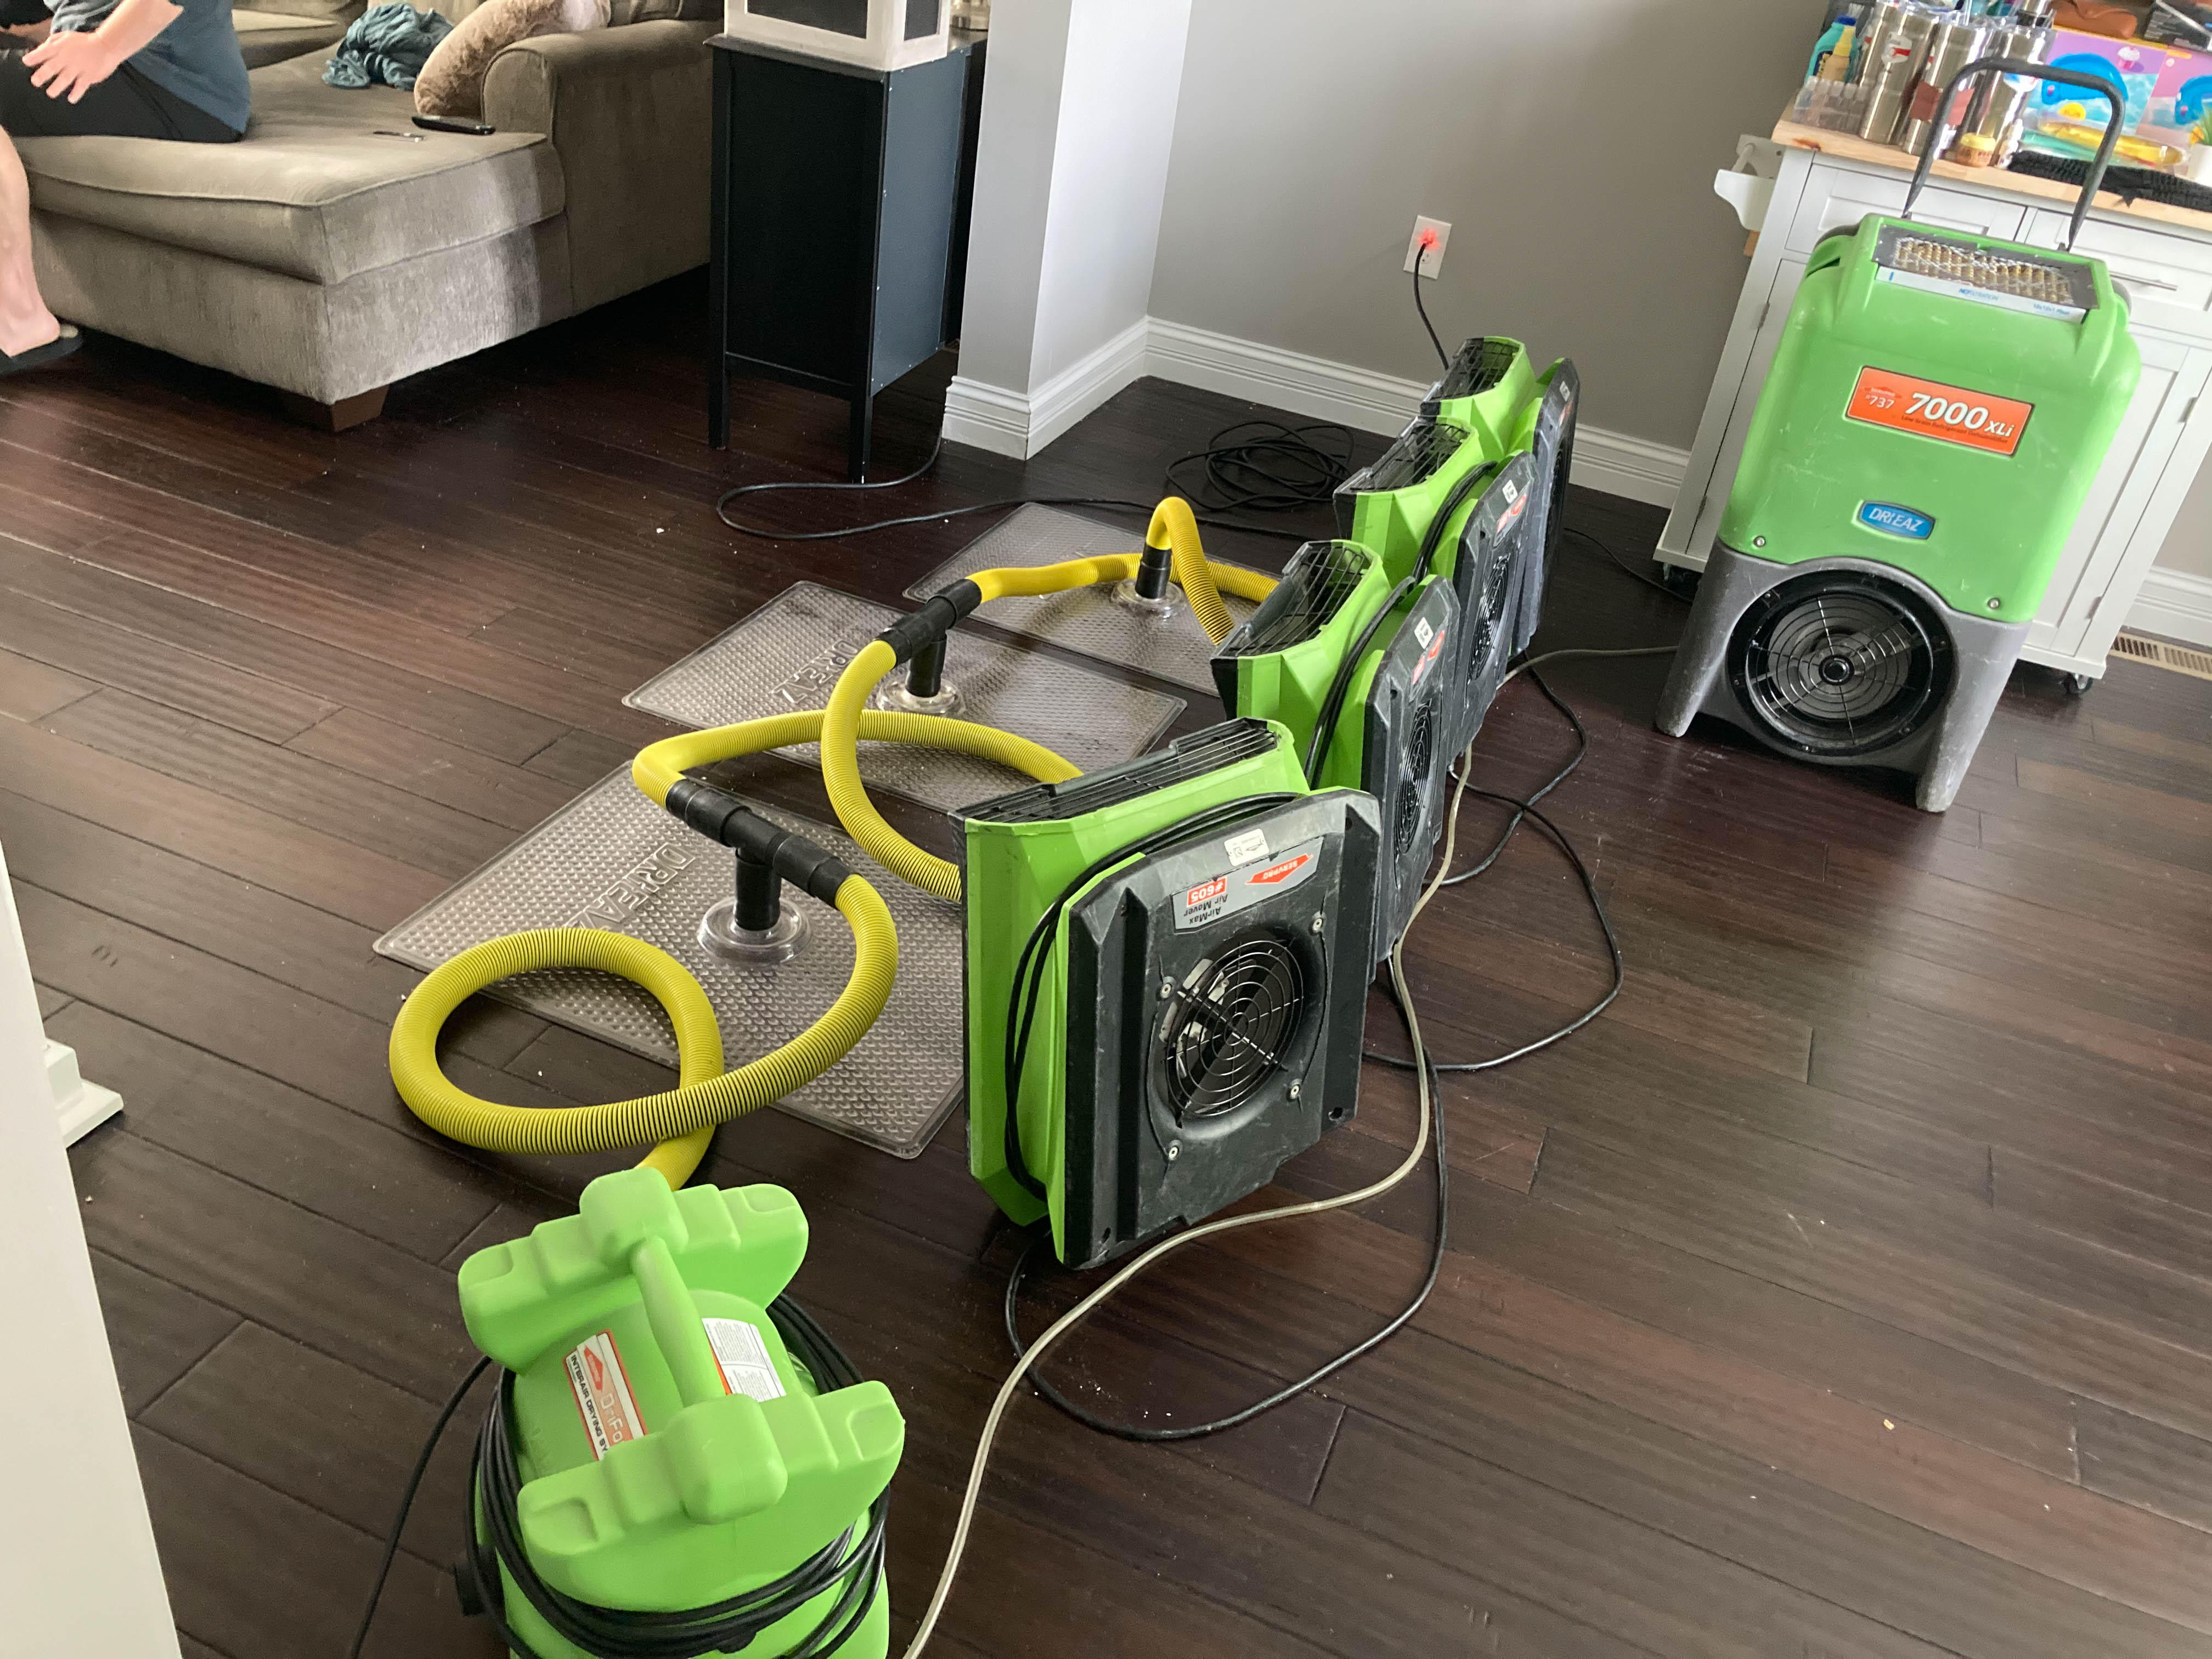 At SERVPRO of St. Louis County NW , we are water damage restoration specialists and are ready to restore your Maryland Heights, MO home back to pre-water damage condition.